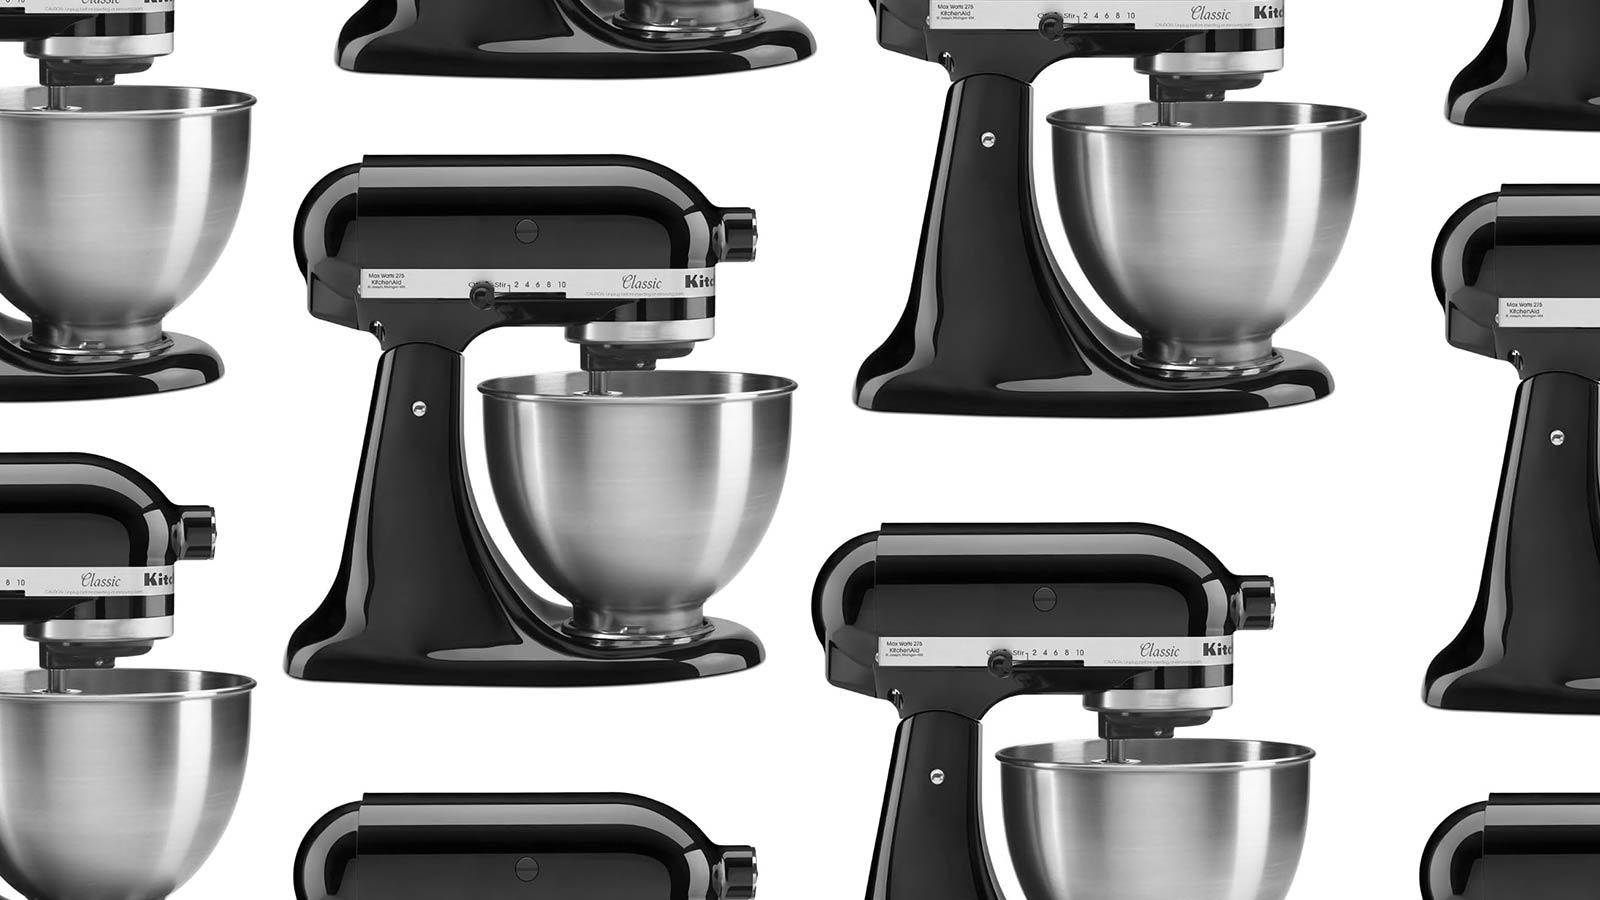 KitchenAid Black Friday deal: Save $170 on this sweet stand mixer - Reviewed